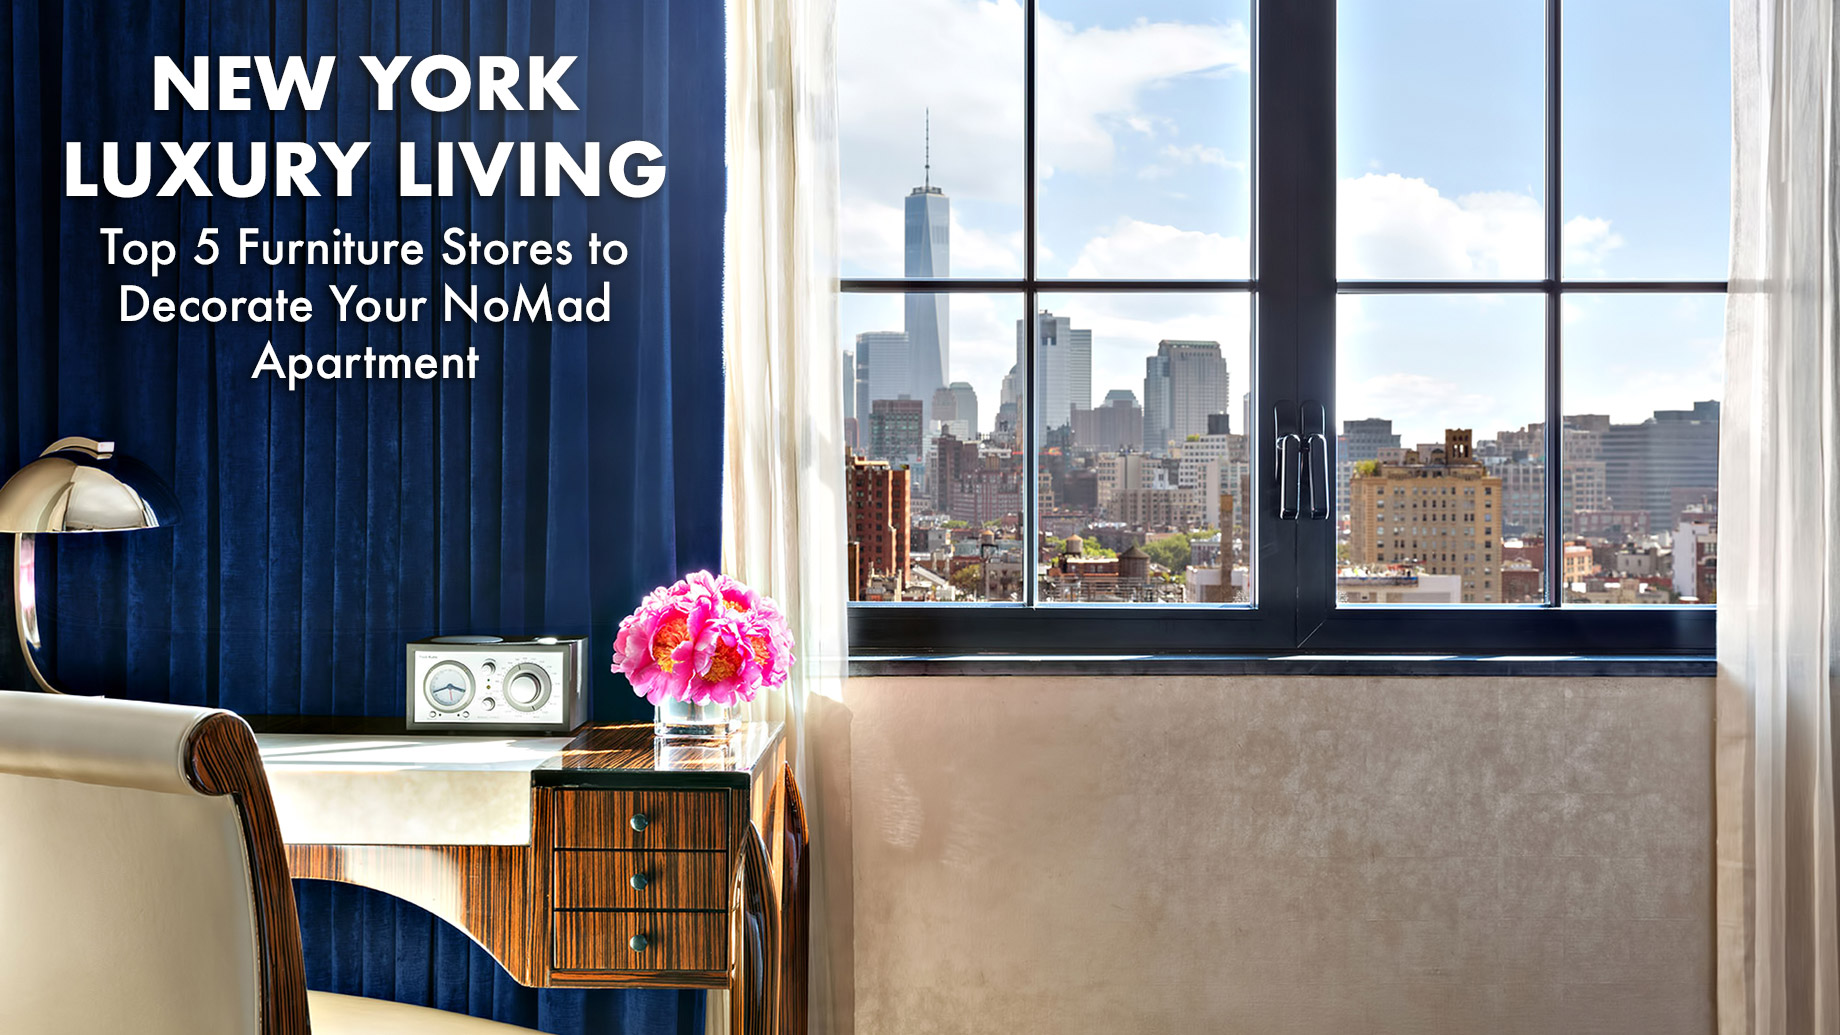 New York Luxury Living - Top 5 Furniture Stores to Decorate Your NoMad Apartment